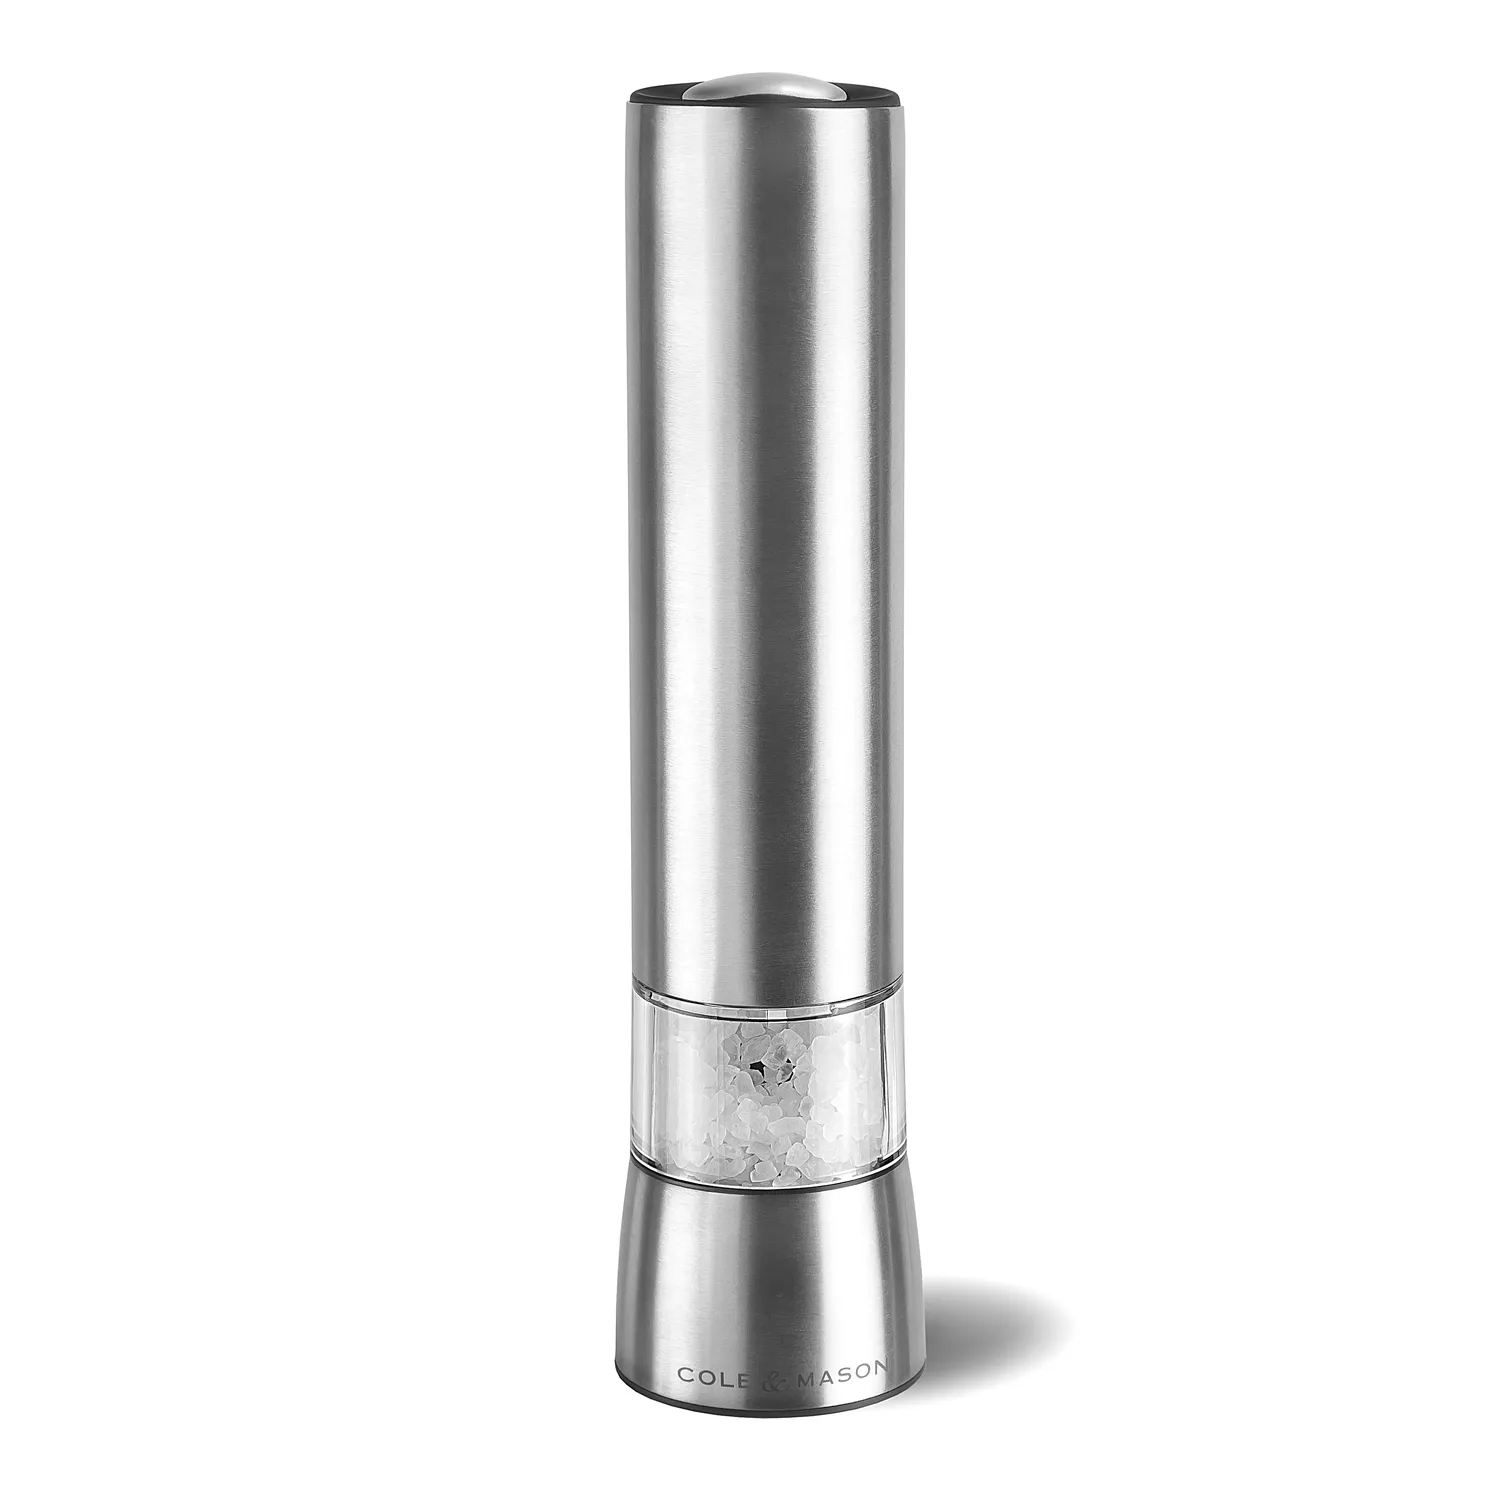 L'Chaim Meats Electric Salt or Pepper Grinder Stainless Steel